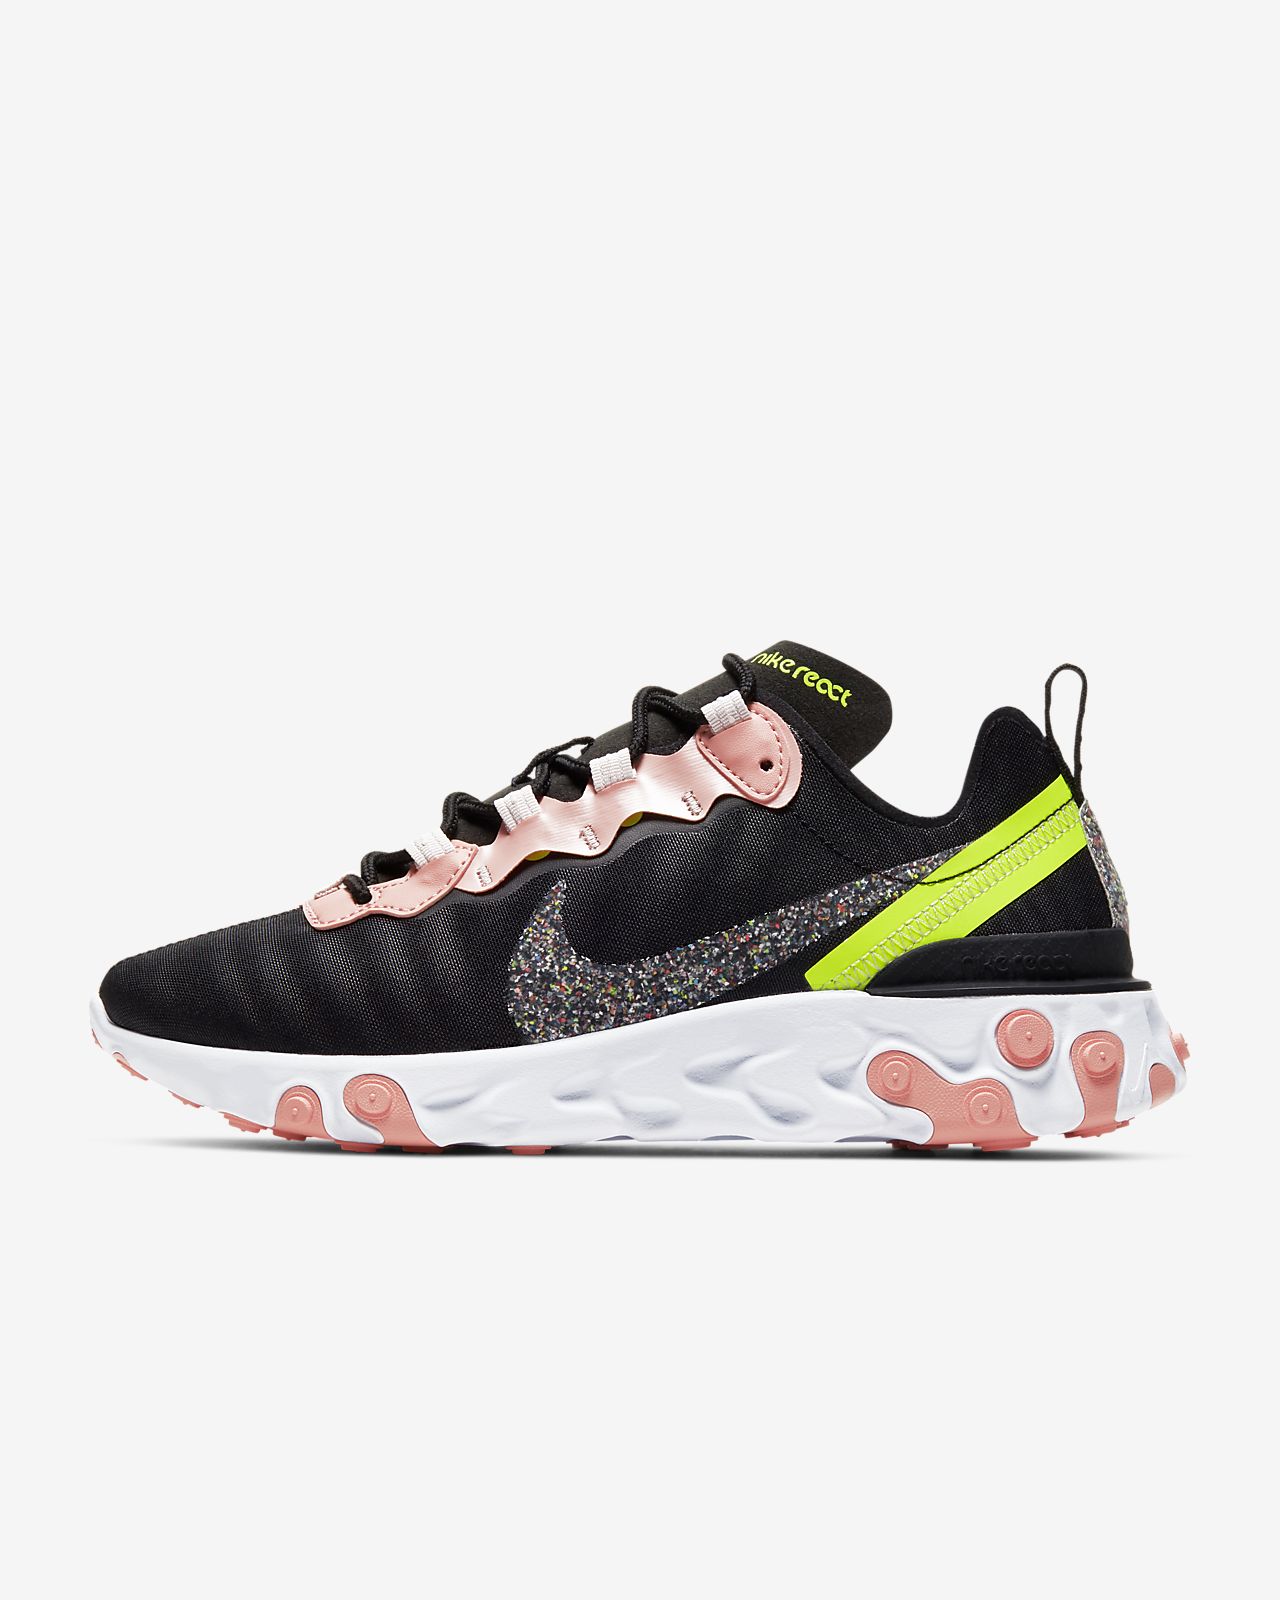 Purchase > nike react element 55 homme promo, Up to 78% OFF